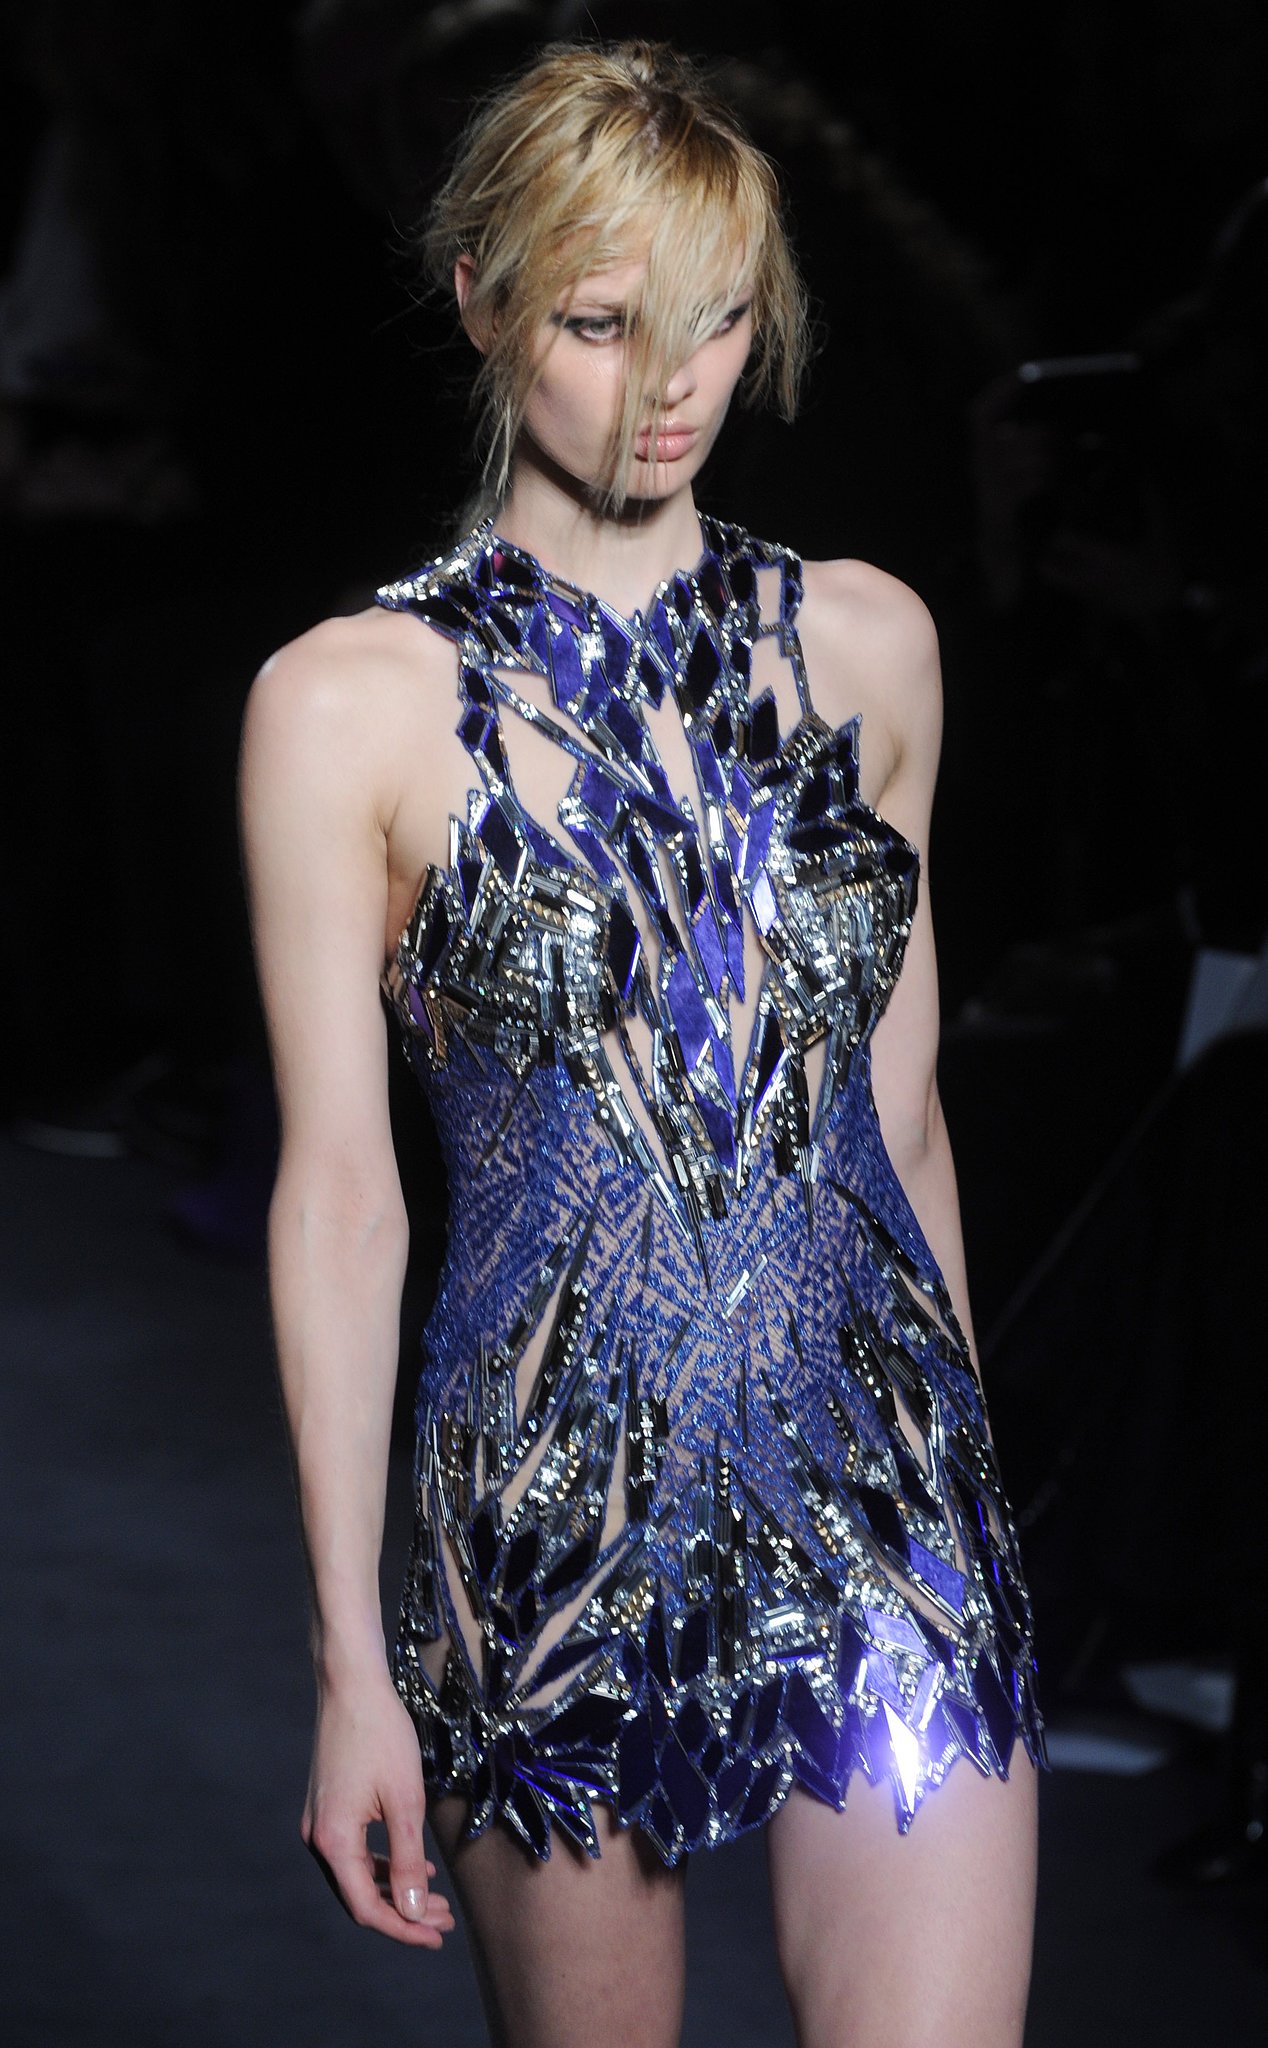 Reptilian Reflective Panels Made Up This Skimpy Party Dress For Runway Retrospective Julien